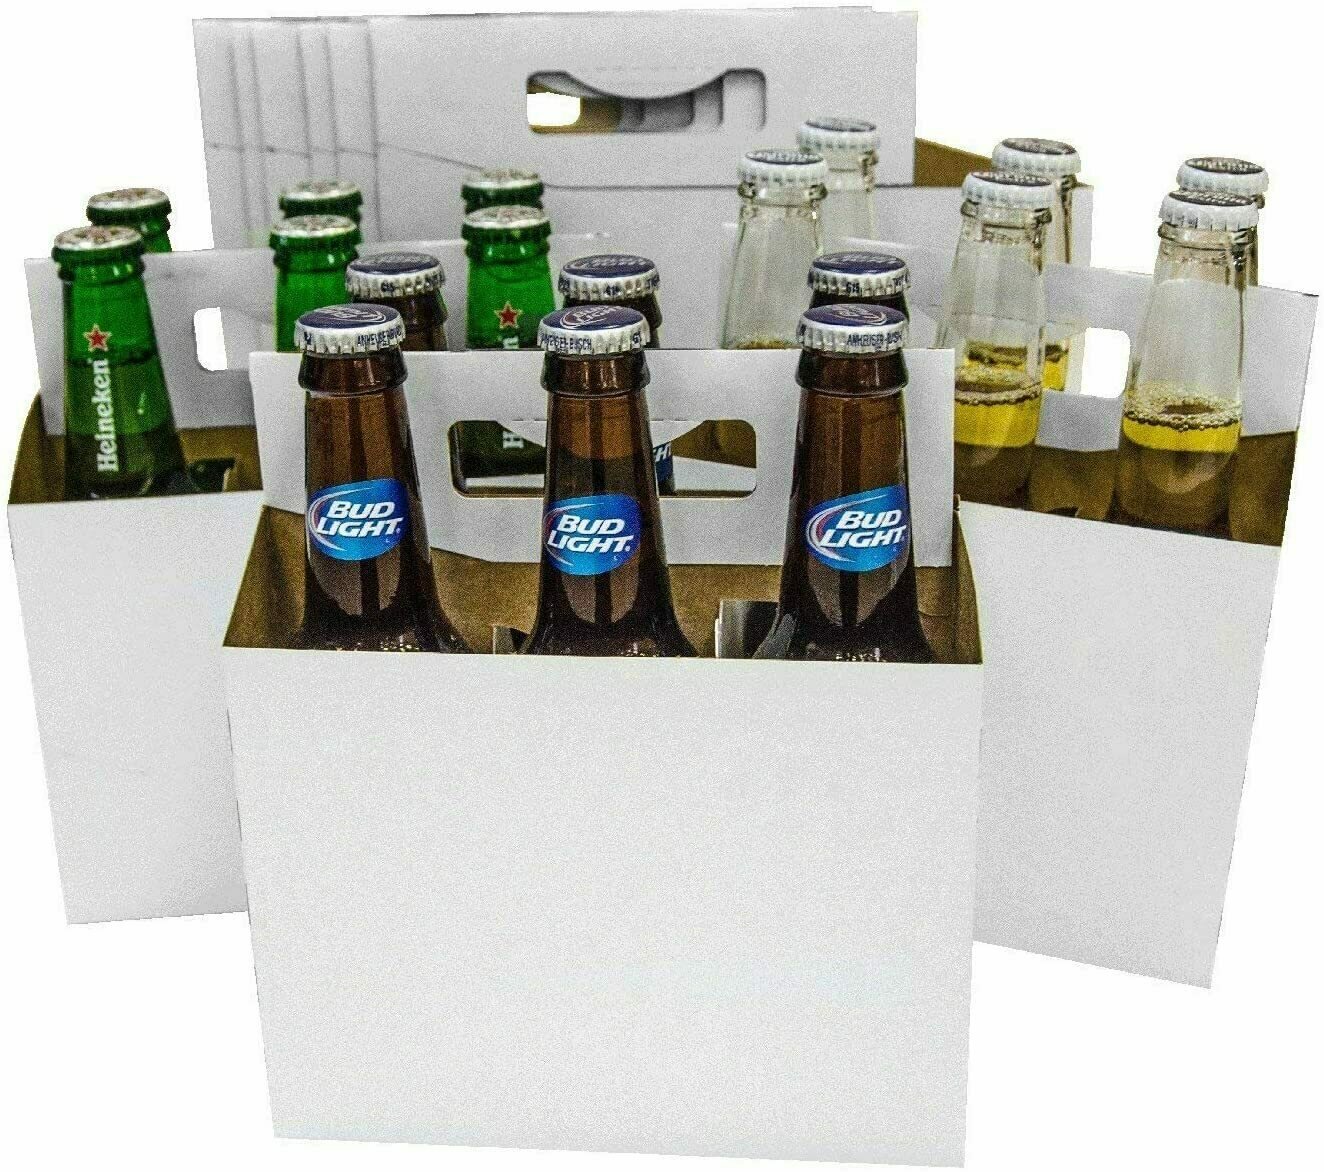 6 Pack Imported beers